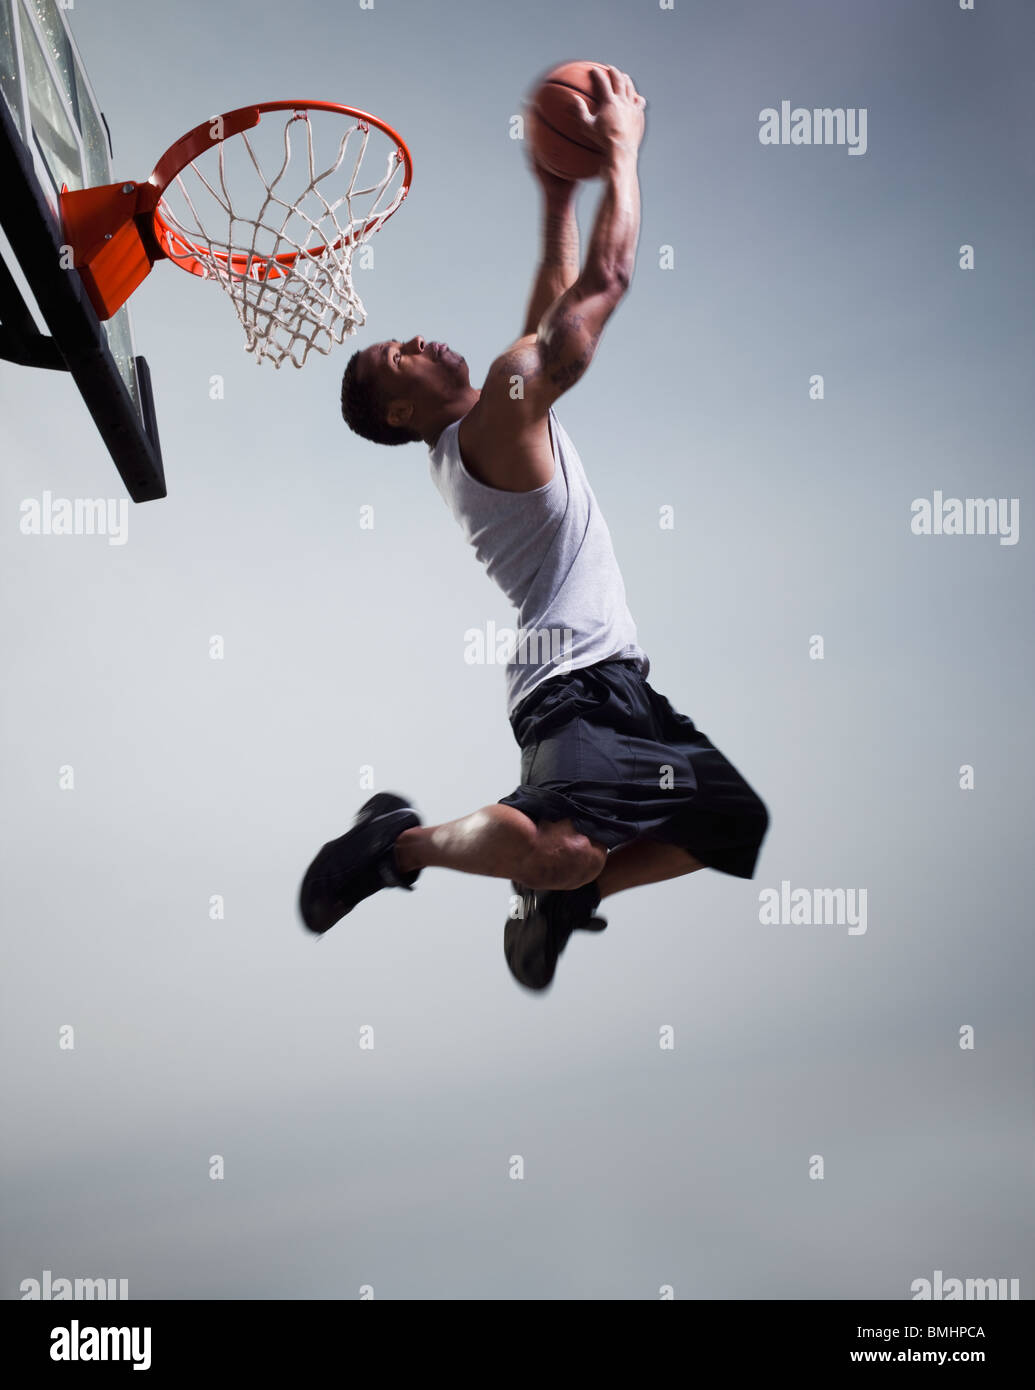 Basket-ball player jumping Banque D'Images